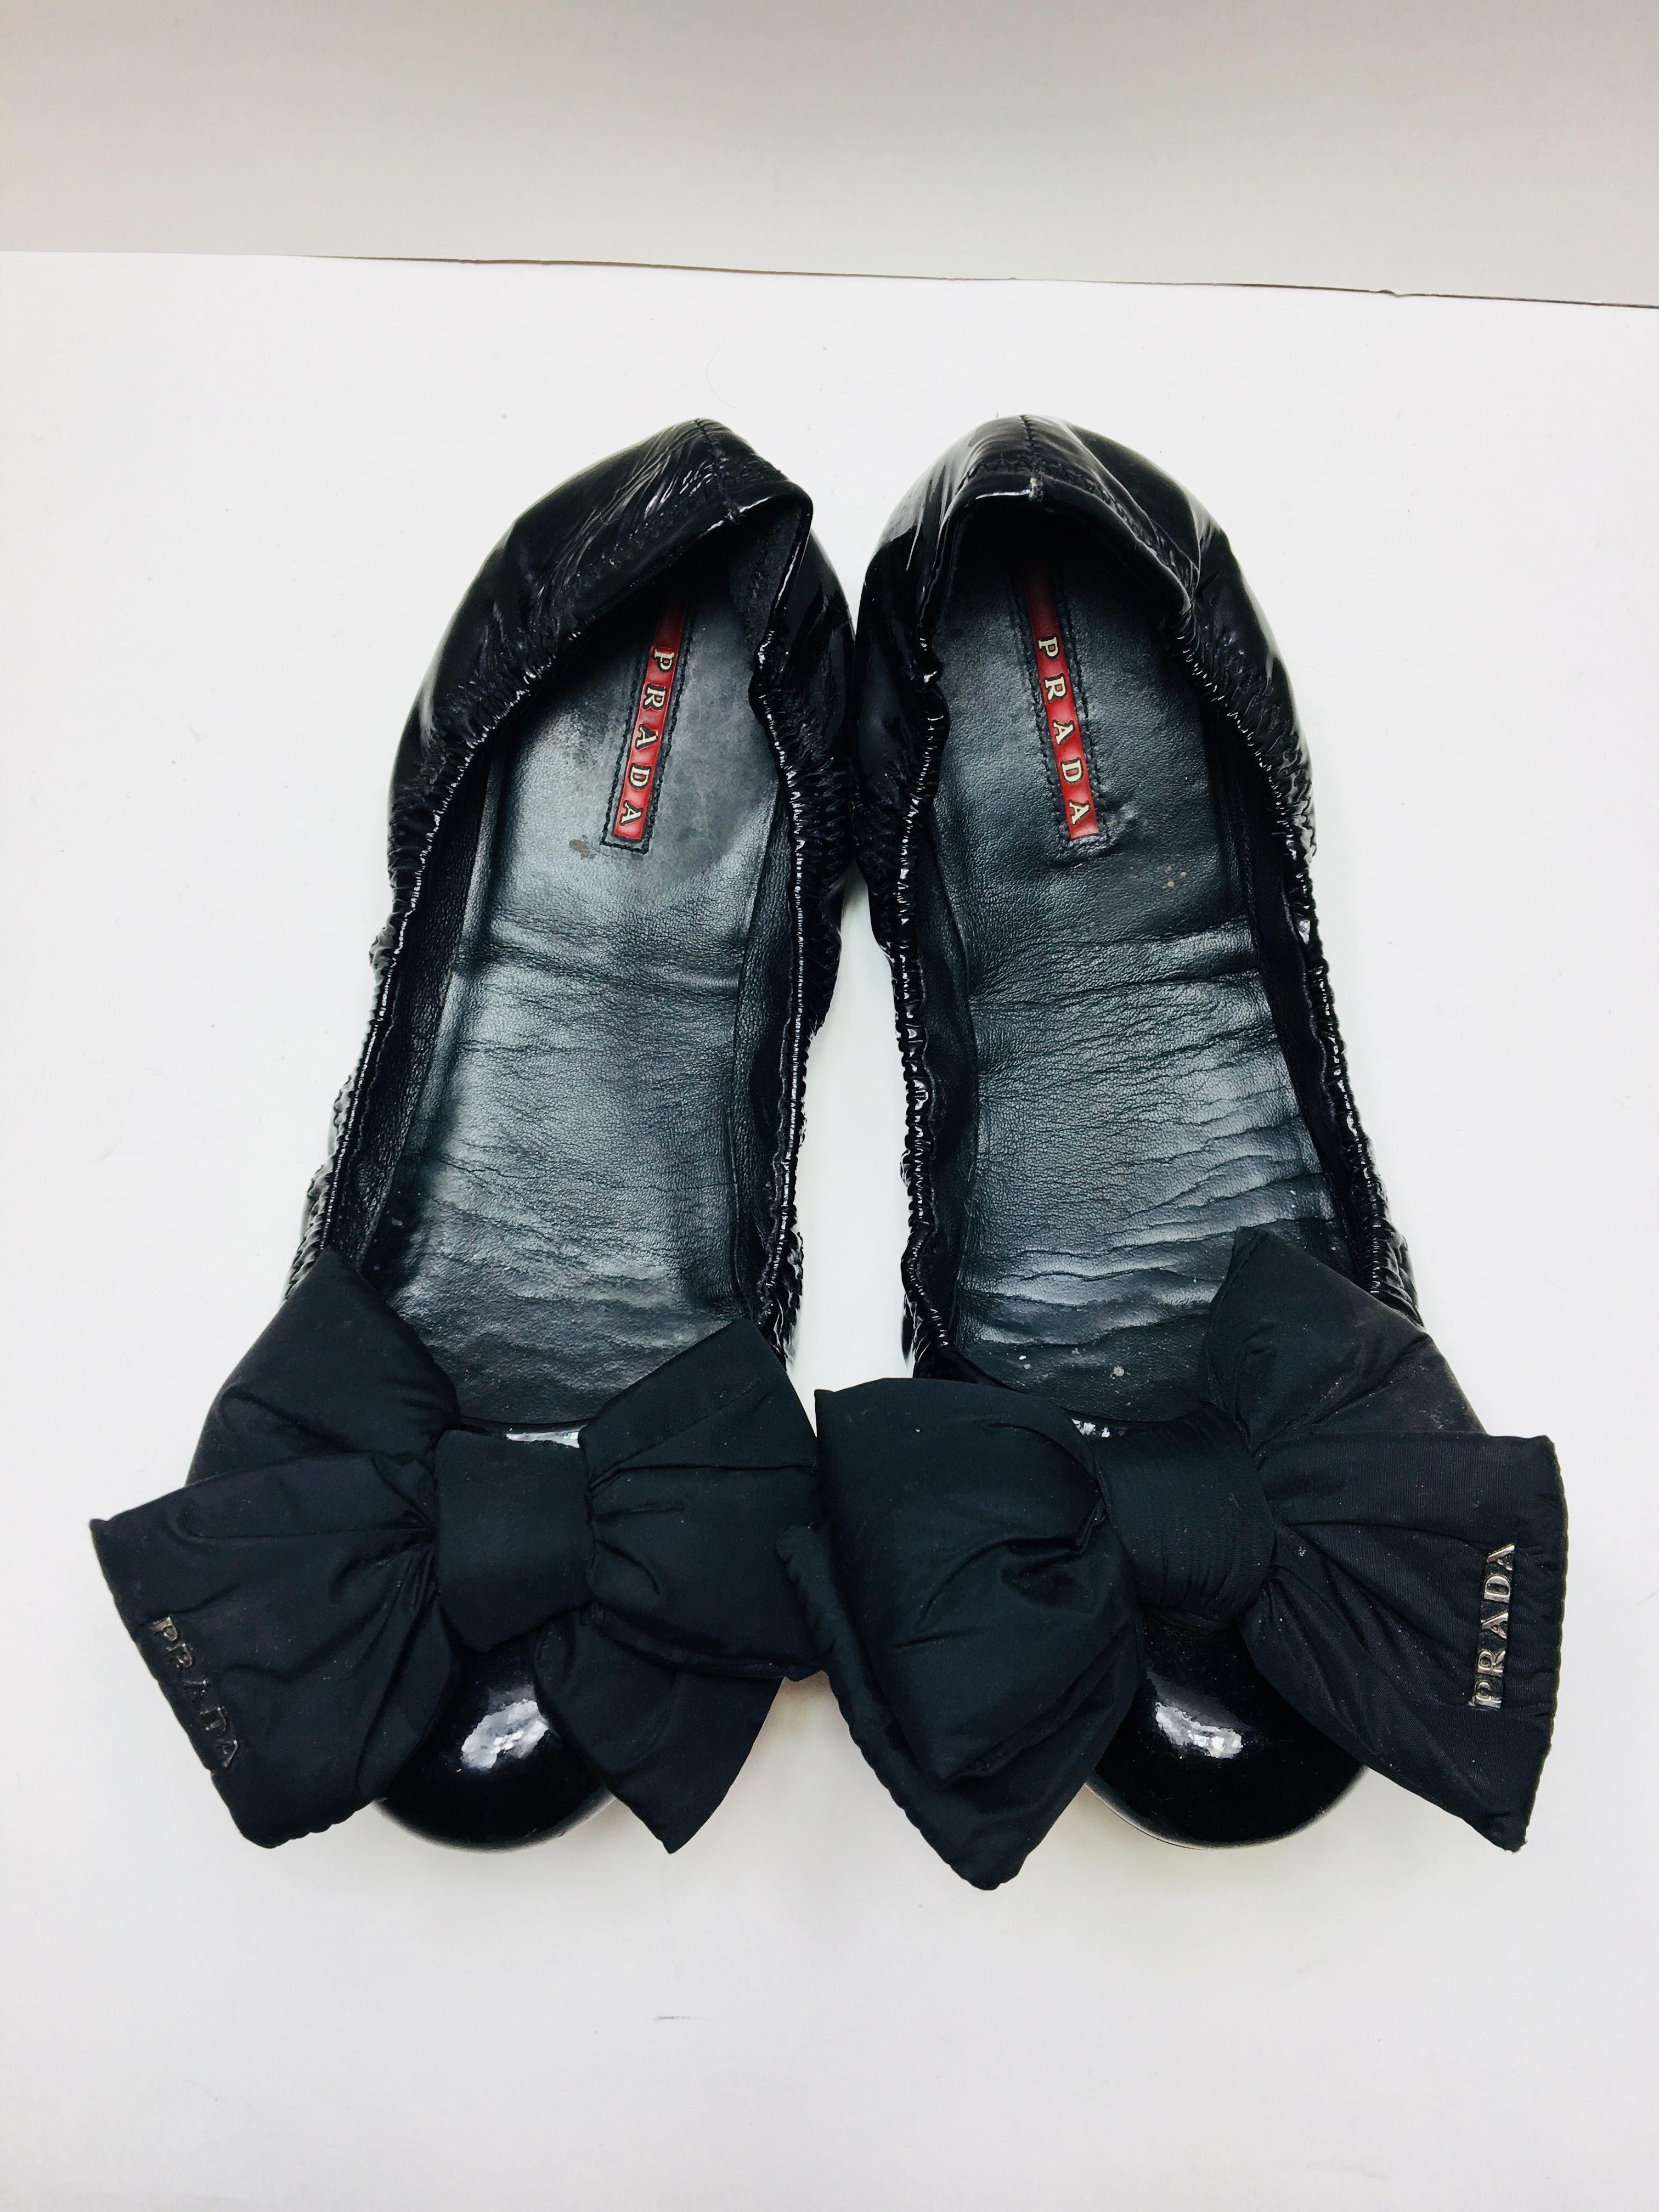 Prada Black Patent Leather Ballet Flat with Bowtie Front. 
Slightly Worn.
Size 39.5